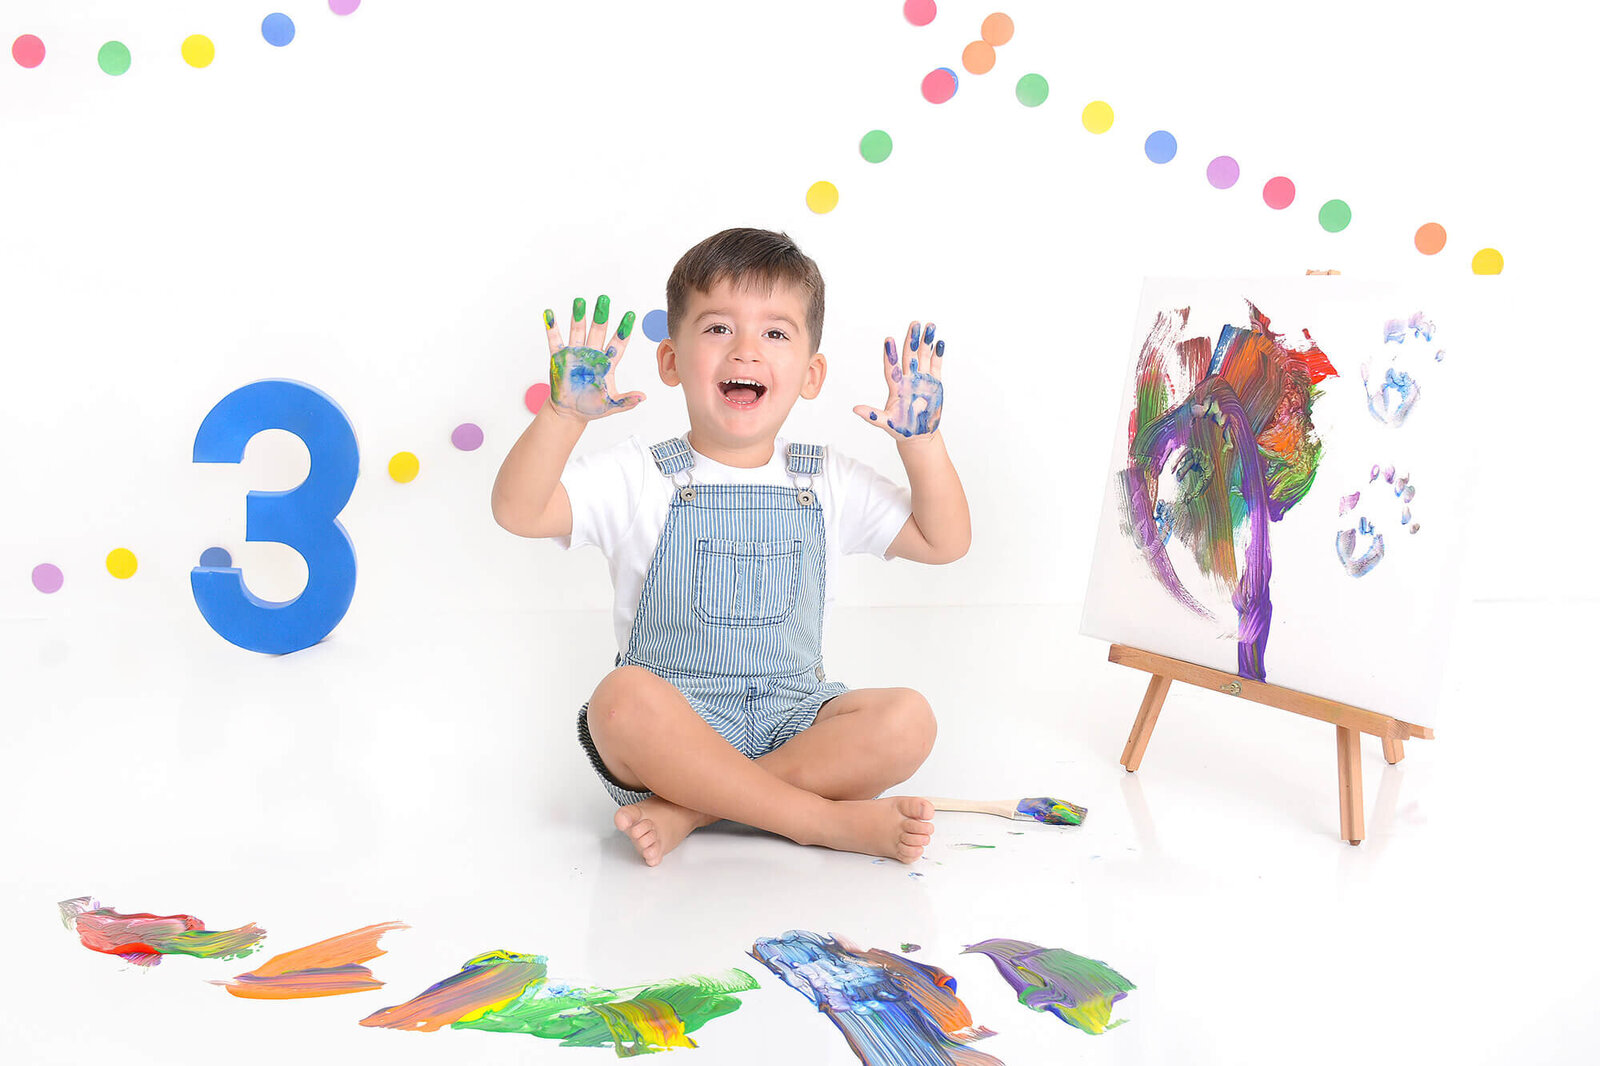 boy smiles at his 3rd birthday paint photoshoot